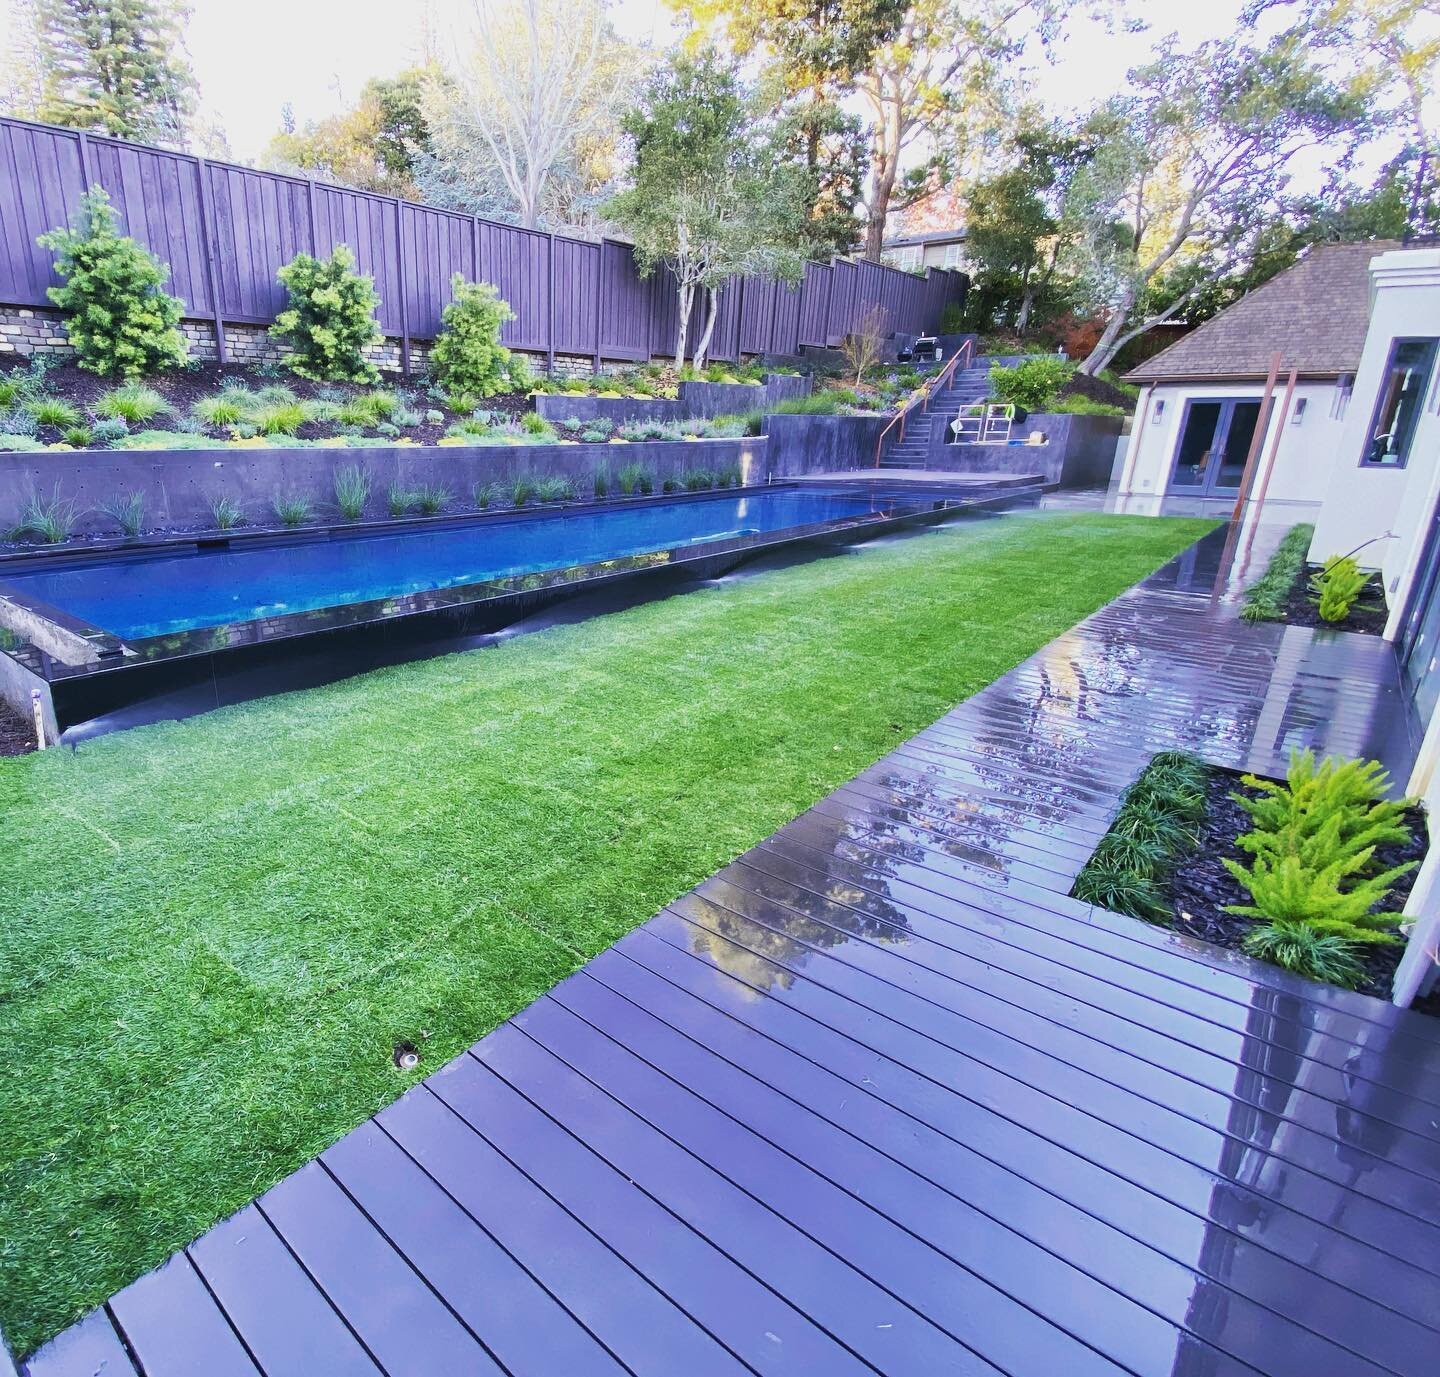 Every square inch to be enjoyed in this modern backyard!